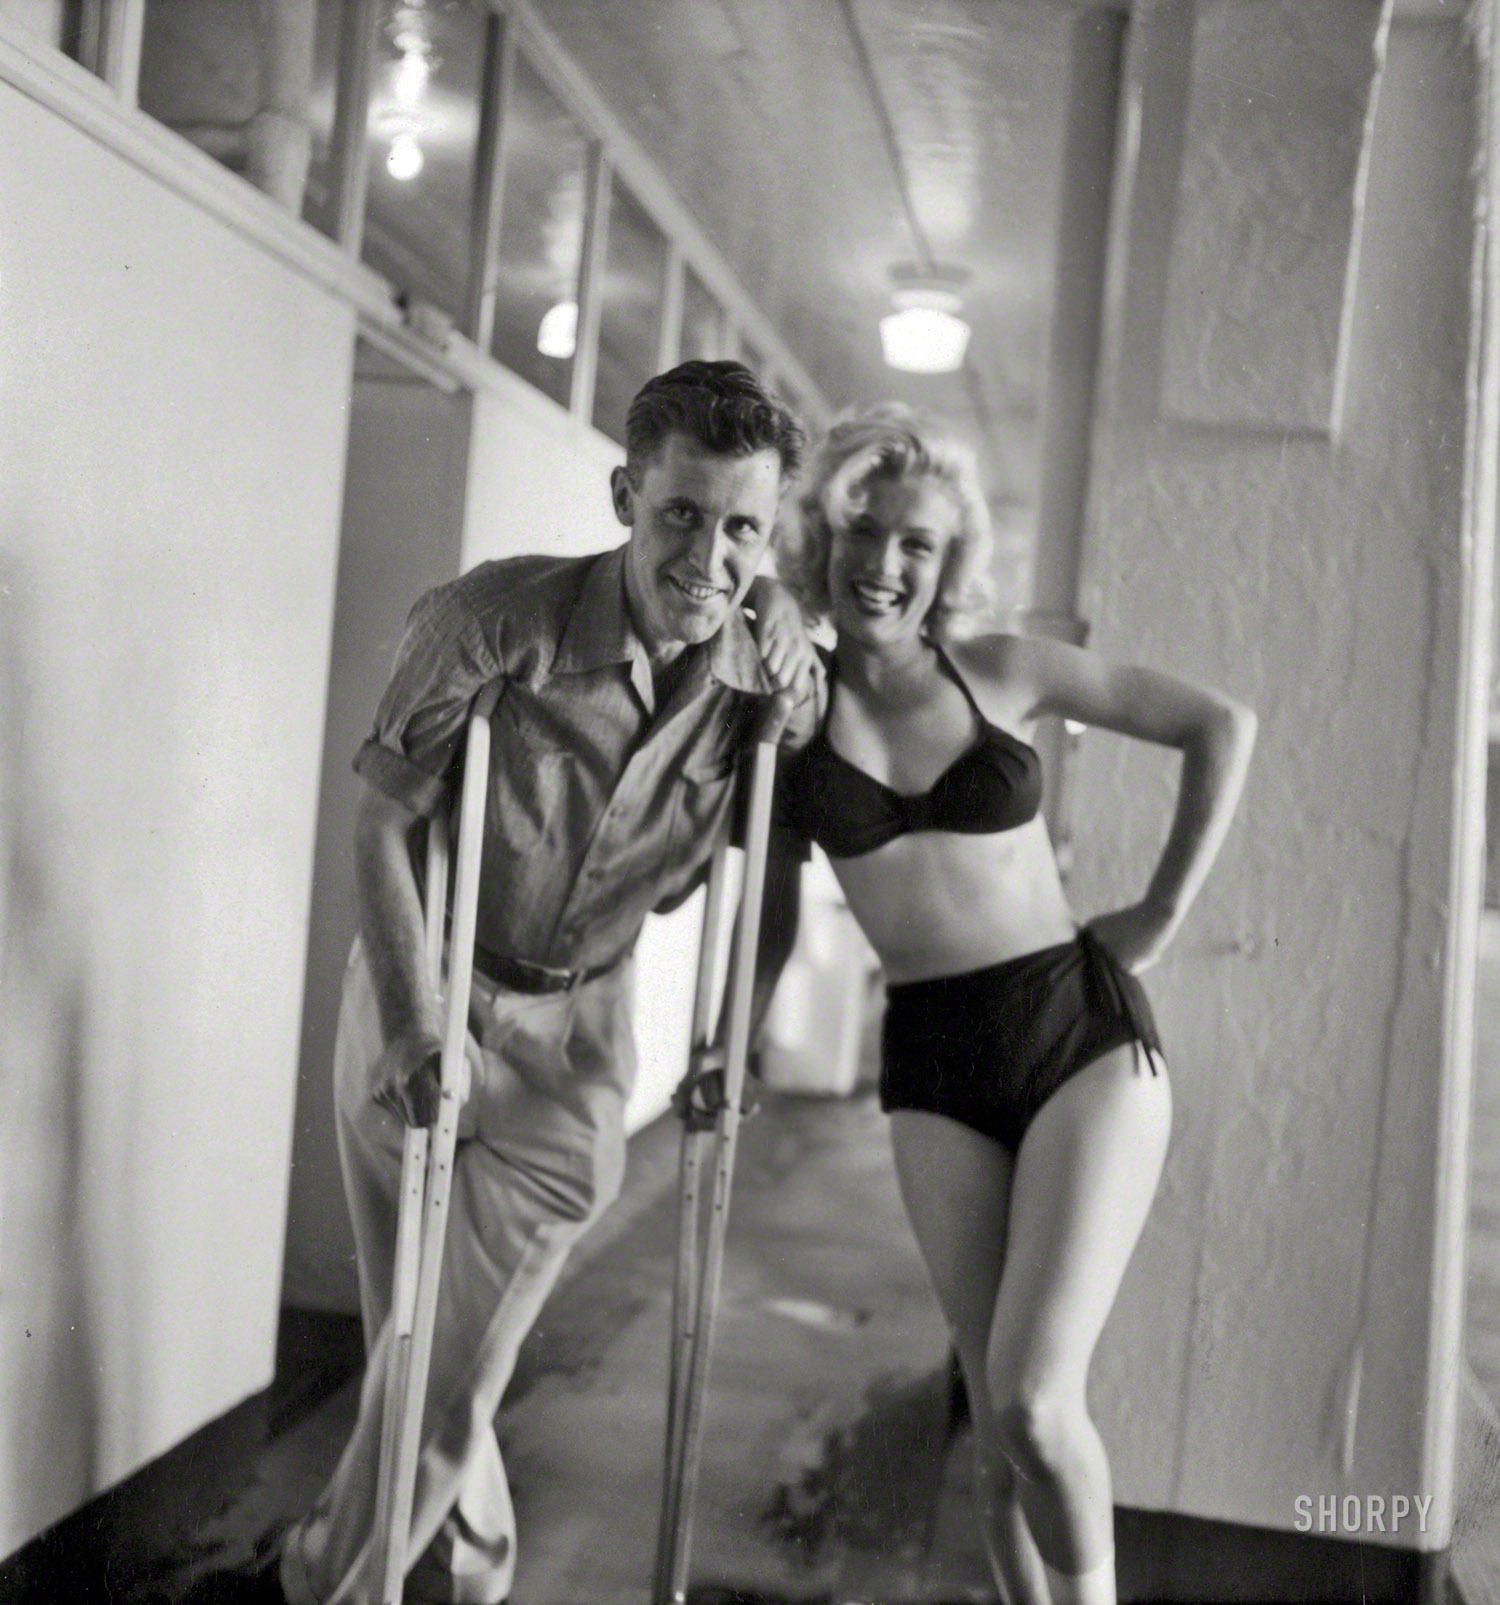 1953. Marilyn Monroe with Look magazine photographer John Vachon in Alberta, Canada, after she hurt her ankle filming River of No Return. View full size.